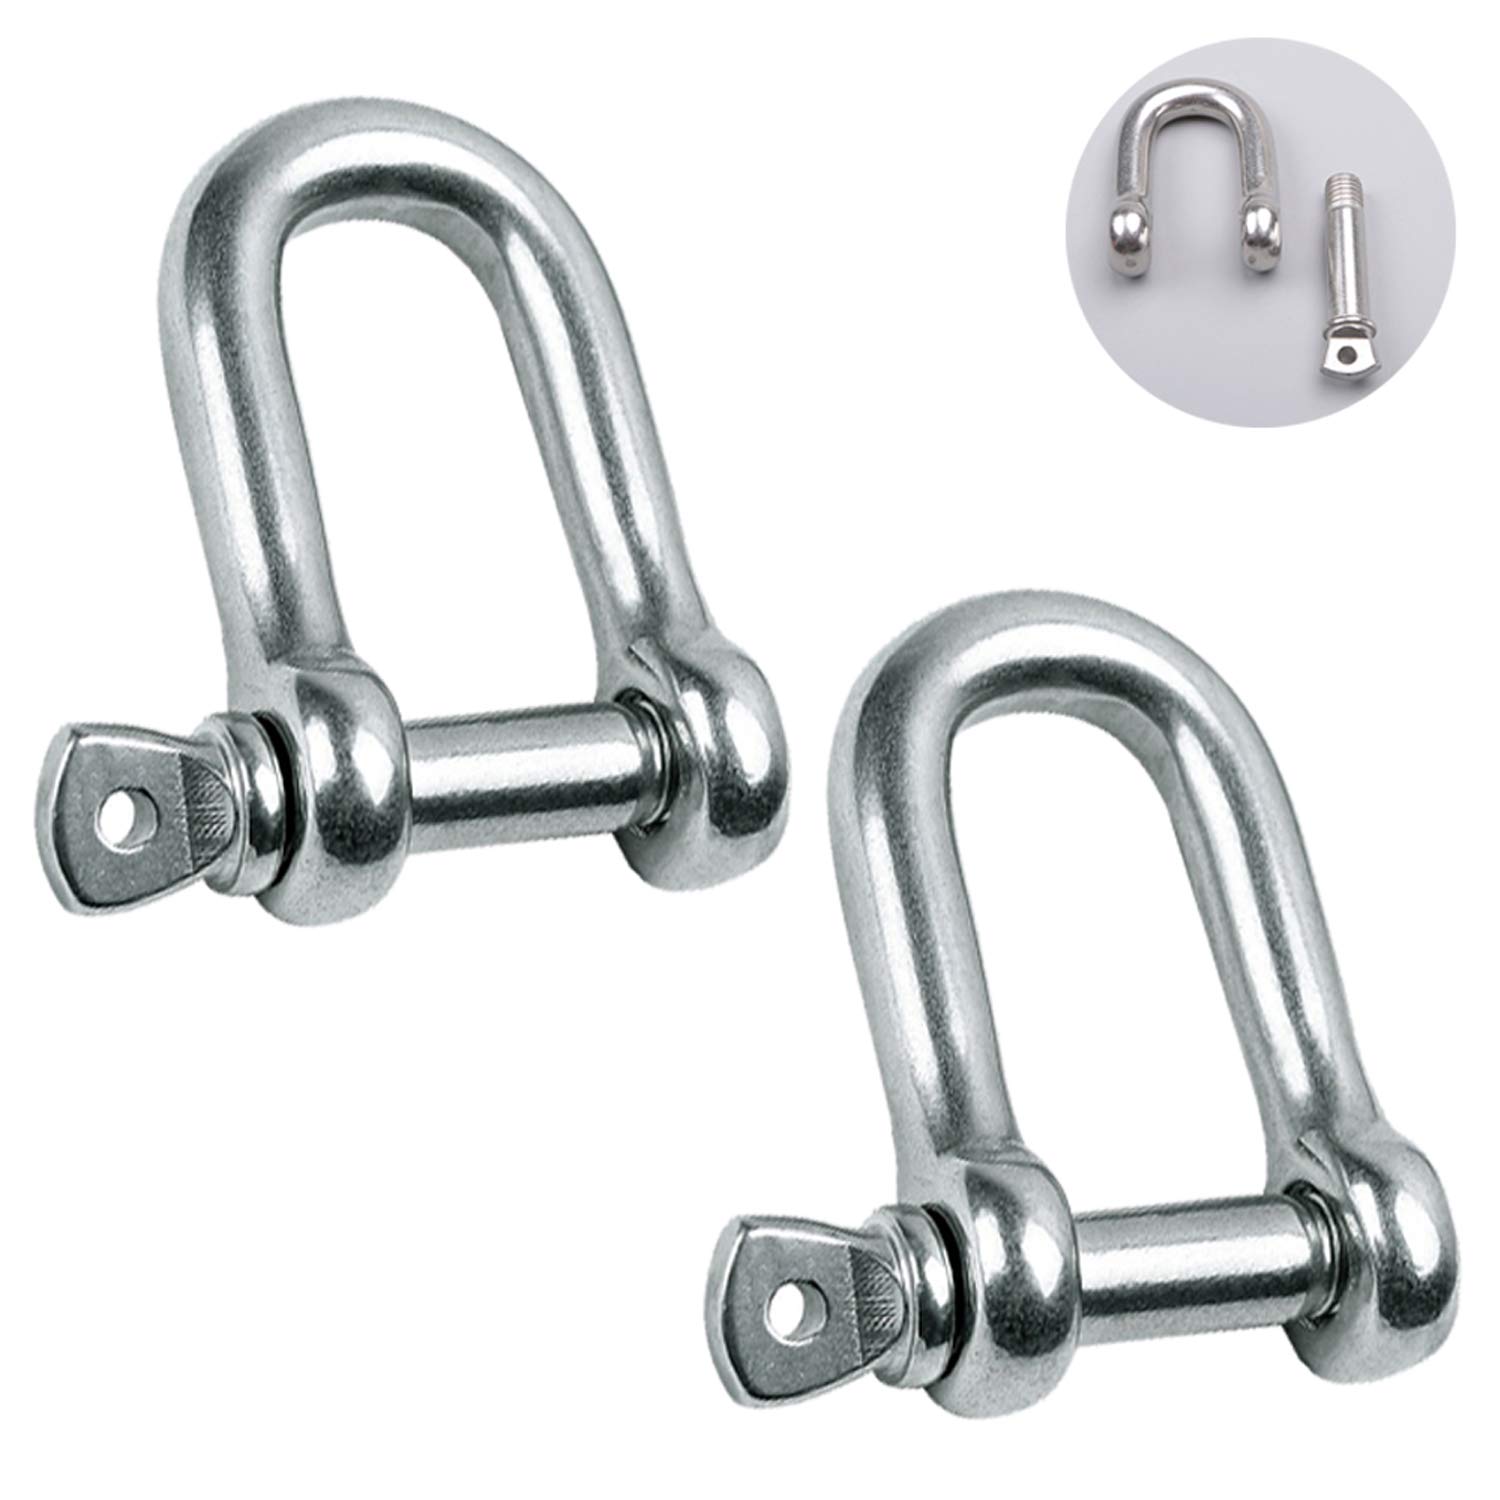 Reedny Stainless Steel 304 D Shape Shackle 5/32, 1/4, 5/16,3/8, 9/16,  for Chains Wirerope Lifting Outdoor Camping Survival Rope Bracelets Or for  Heavy Duty Construction 3/8 2Pcs